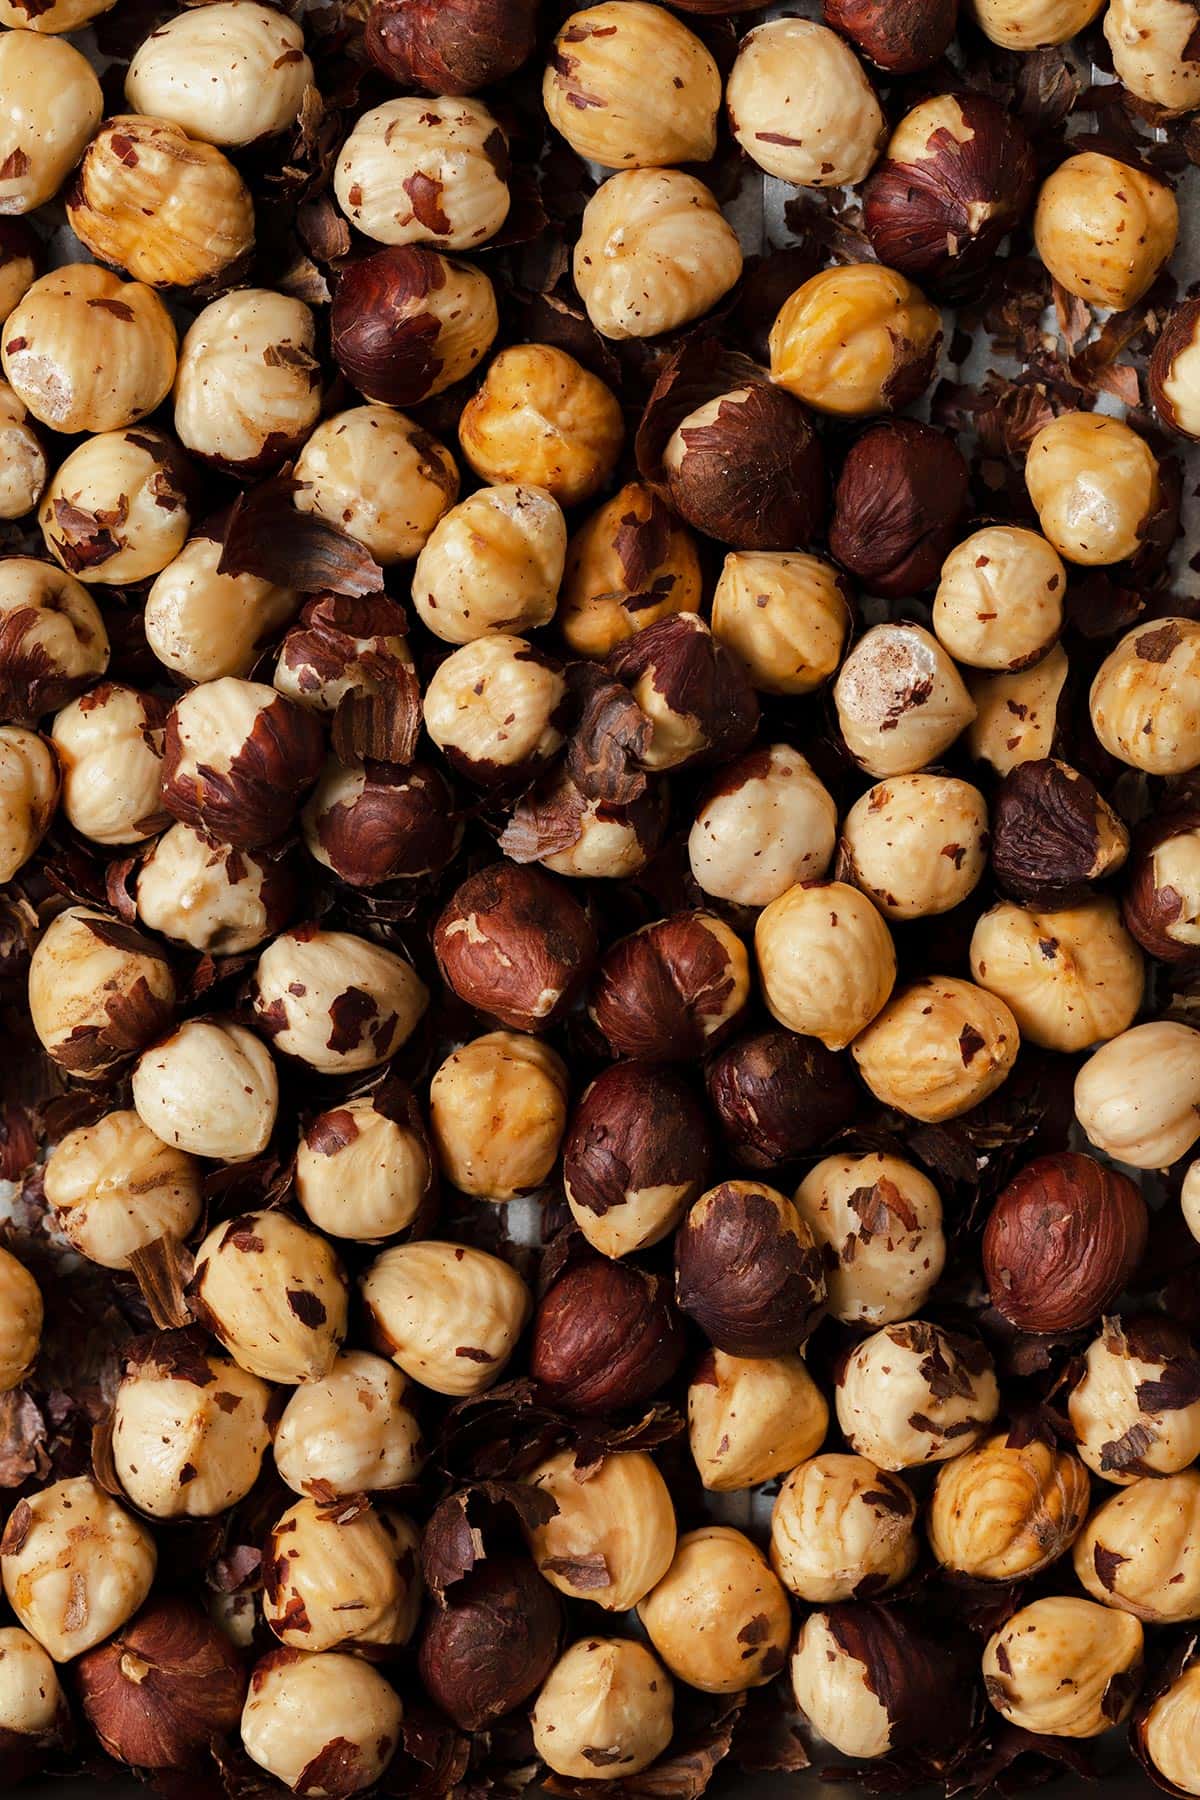 A close up of roasted hazelnuts with their skins removed.